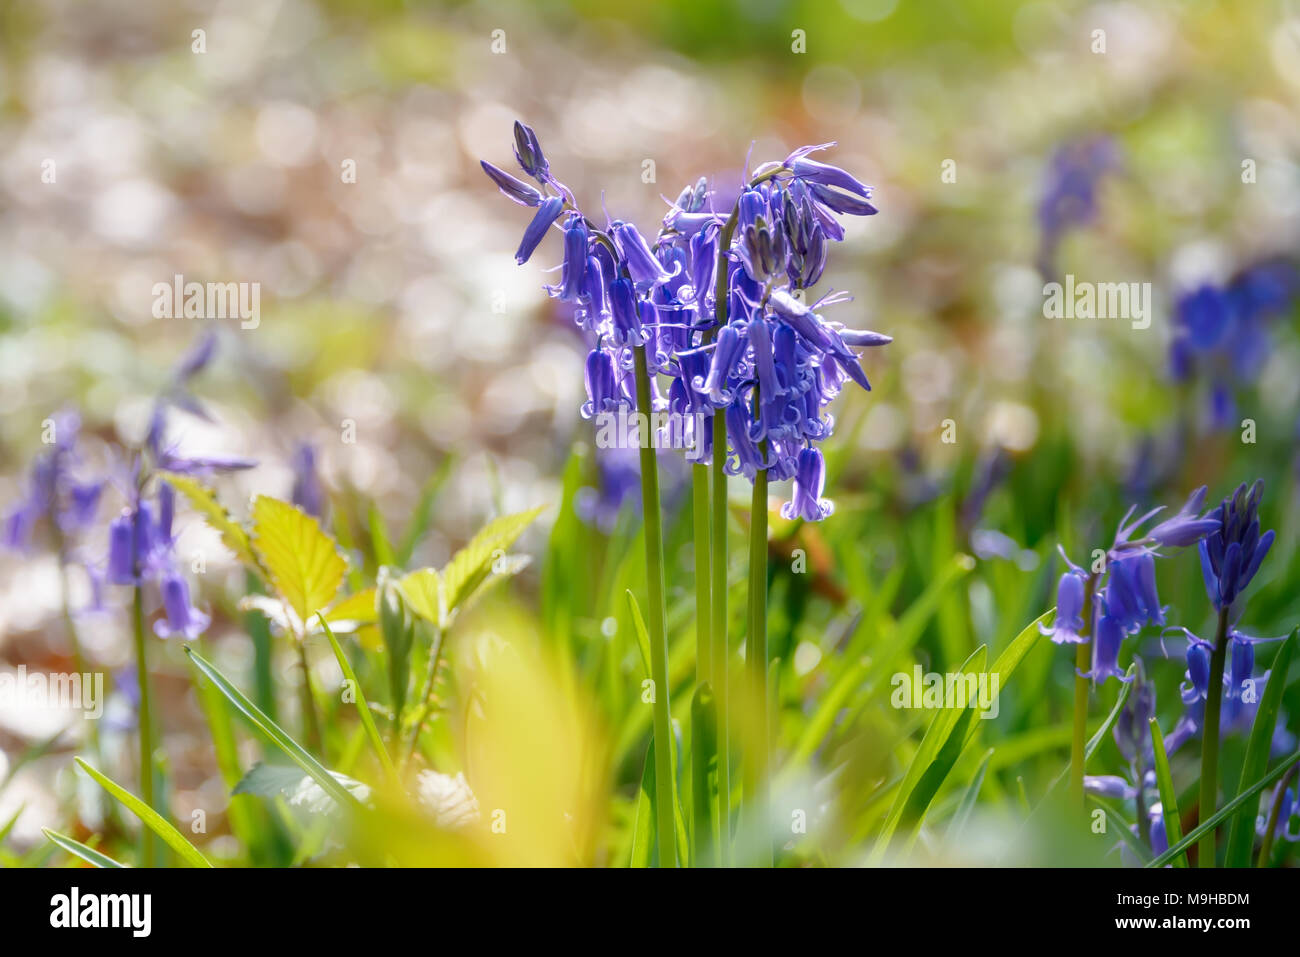 Close up of a group of common bluebells, Hyacinthoides non-scripta, blue flowers in a beech forest in spring, Doveren, North Rhine-Westphalia Germany Stock Photo